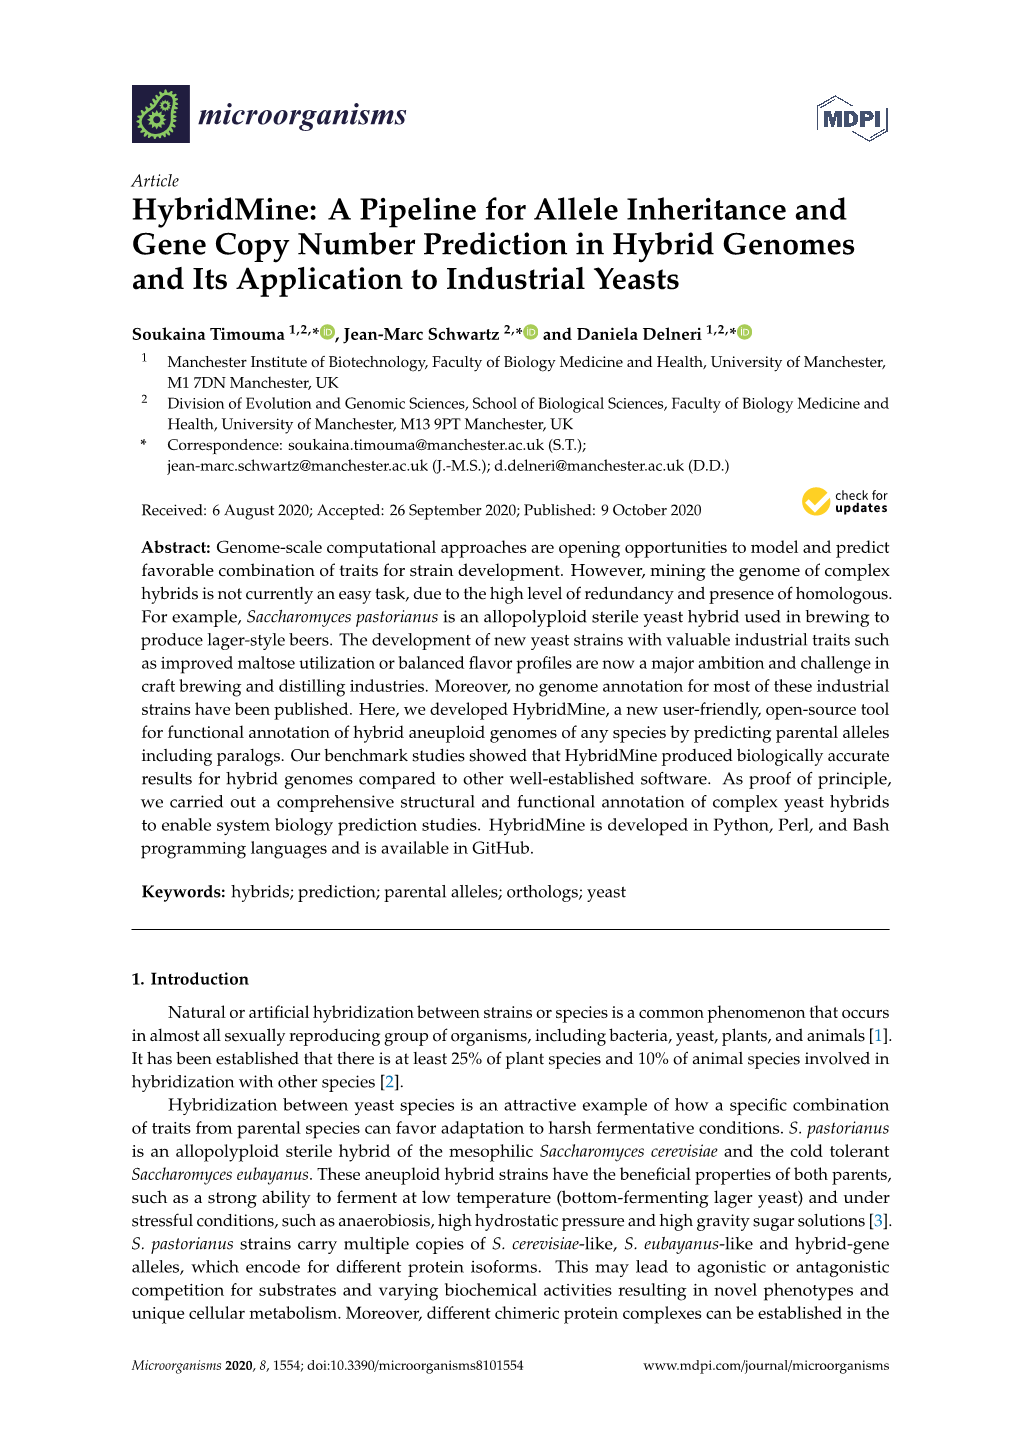 Hybridmine: a Pipeline for Allele Inheritance and Gene Copy Number Prediction in Hybrid Genomes and Its Application to Industrial Yeasts